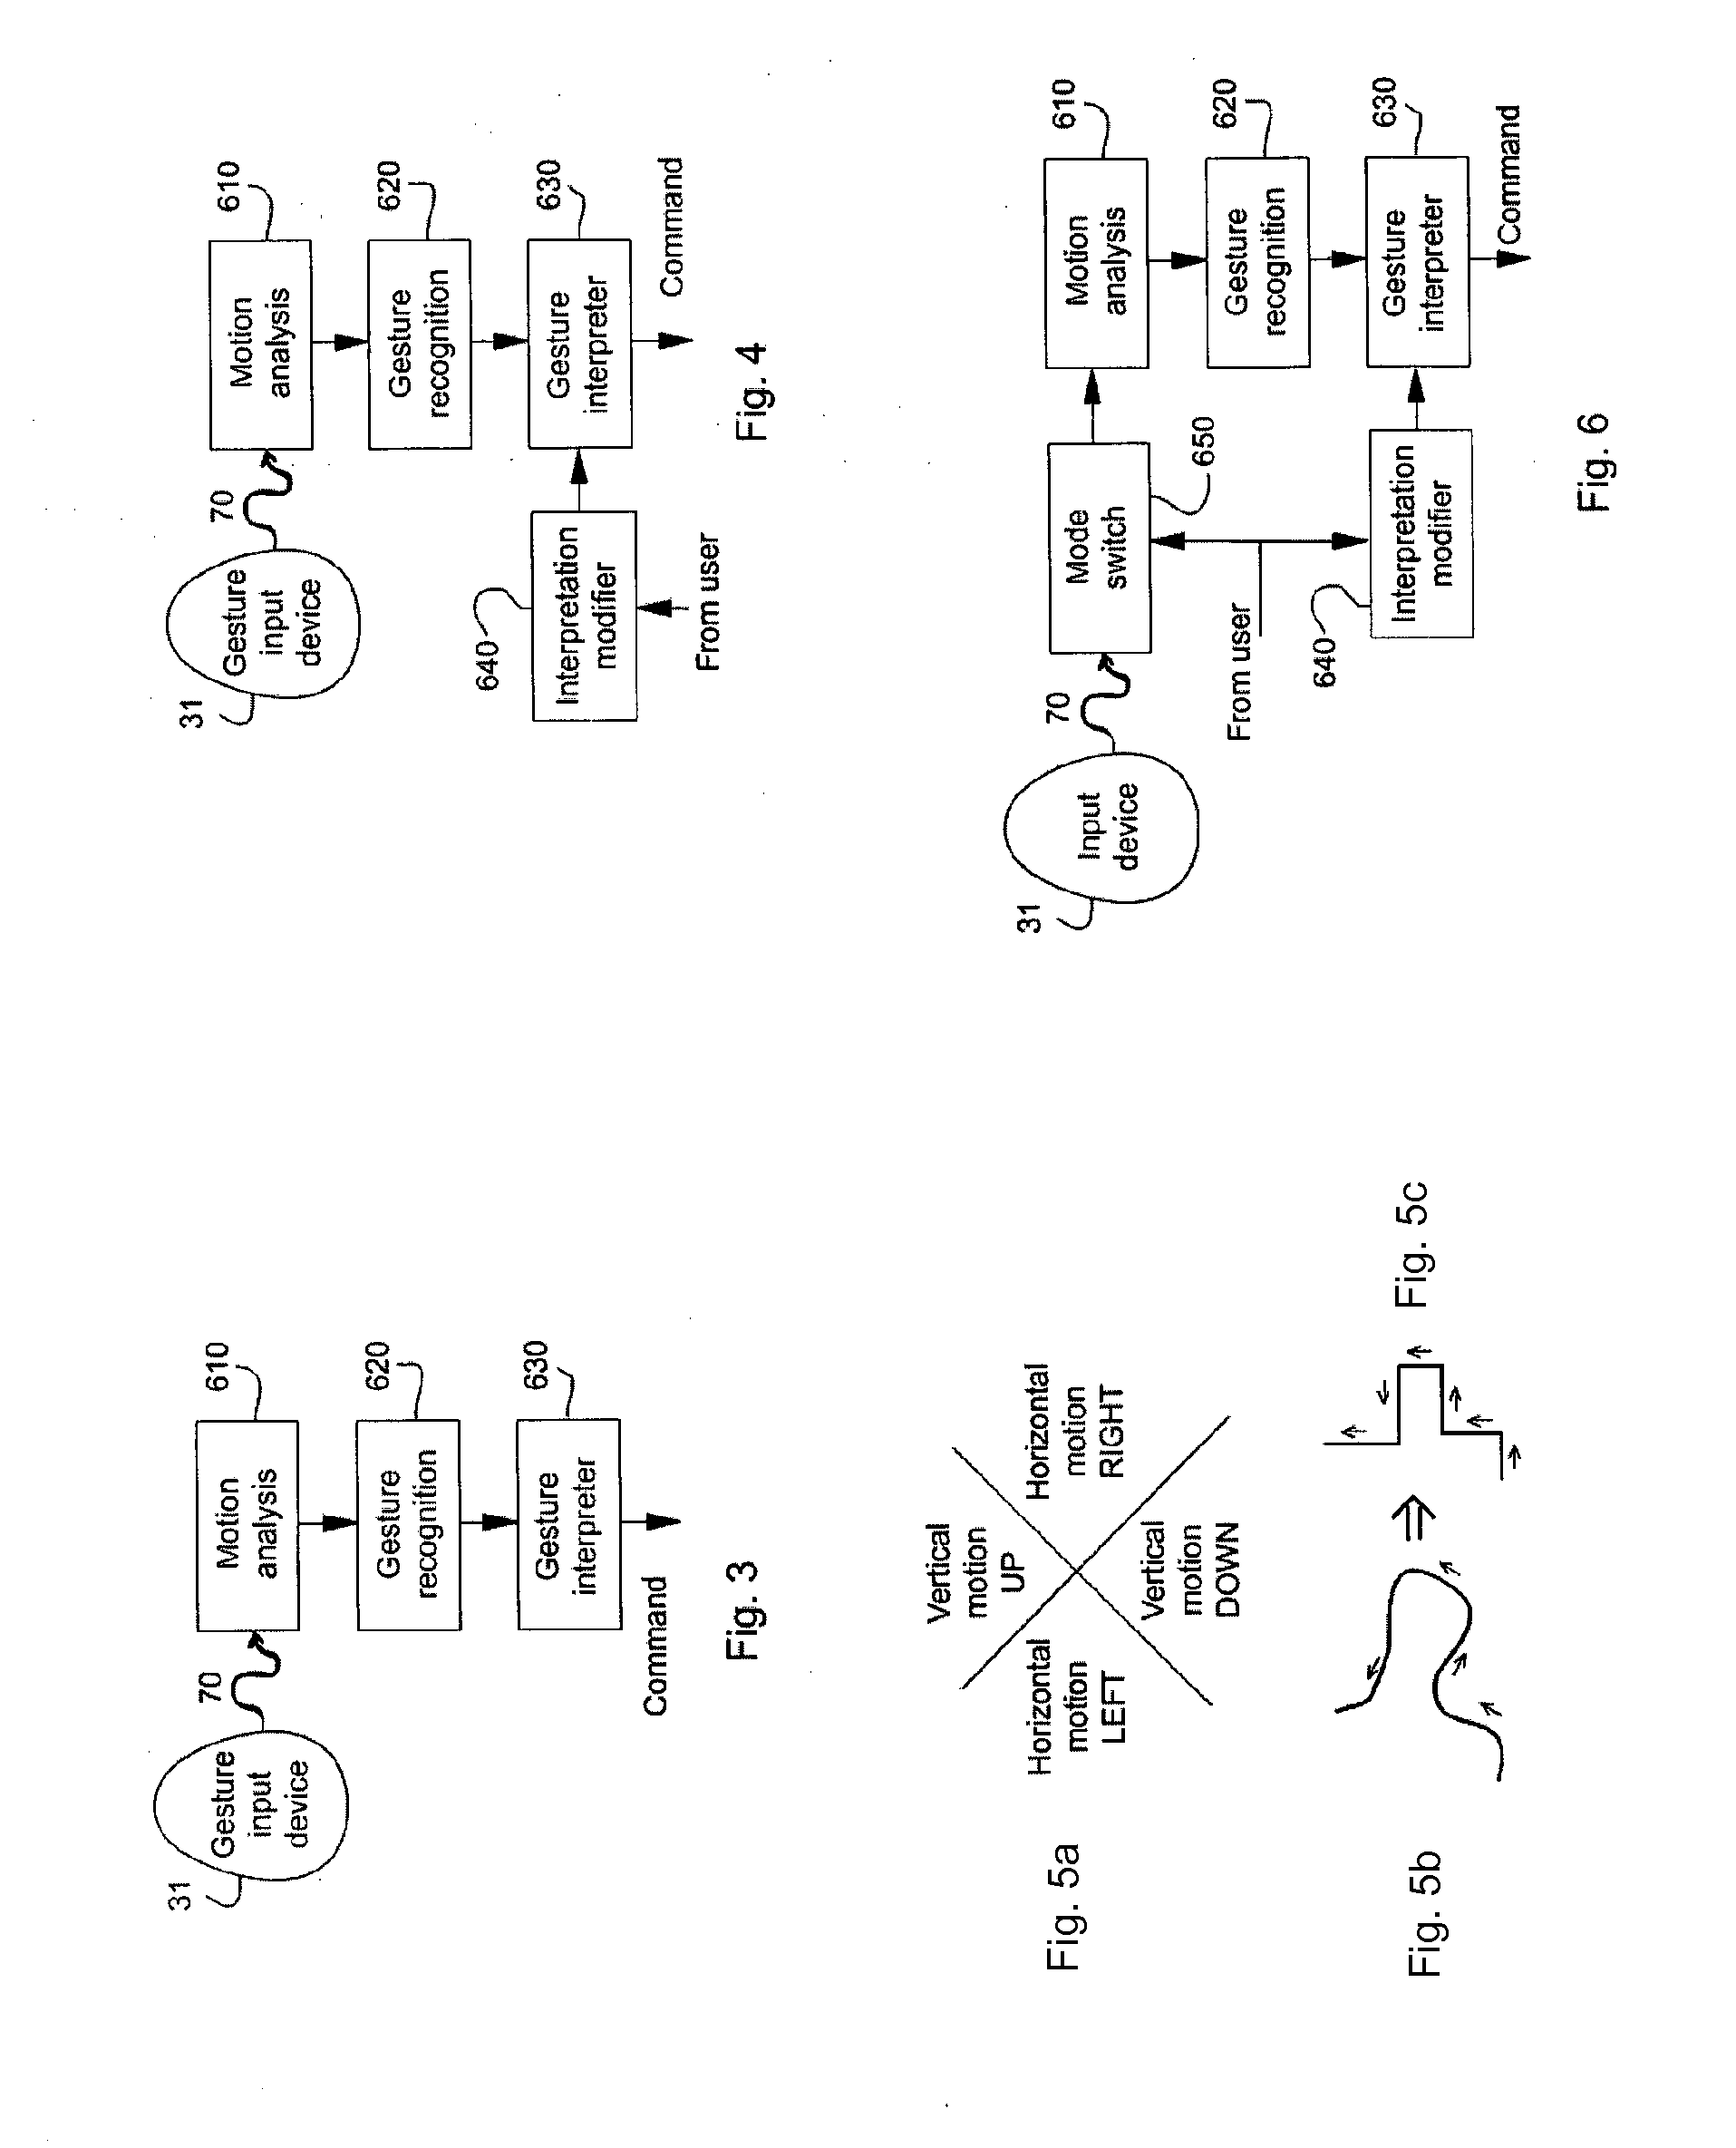 Gesture based computer interface system and method